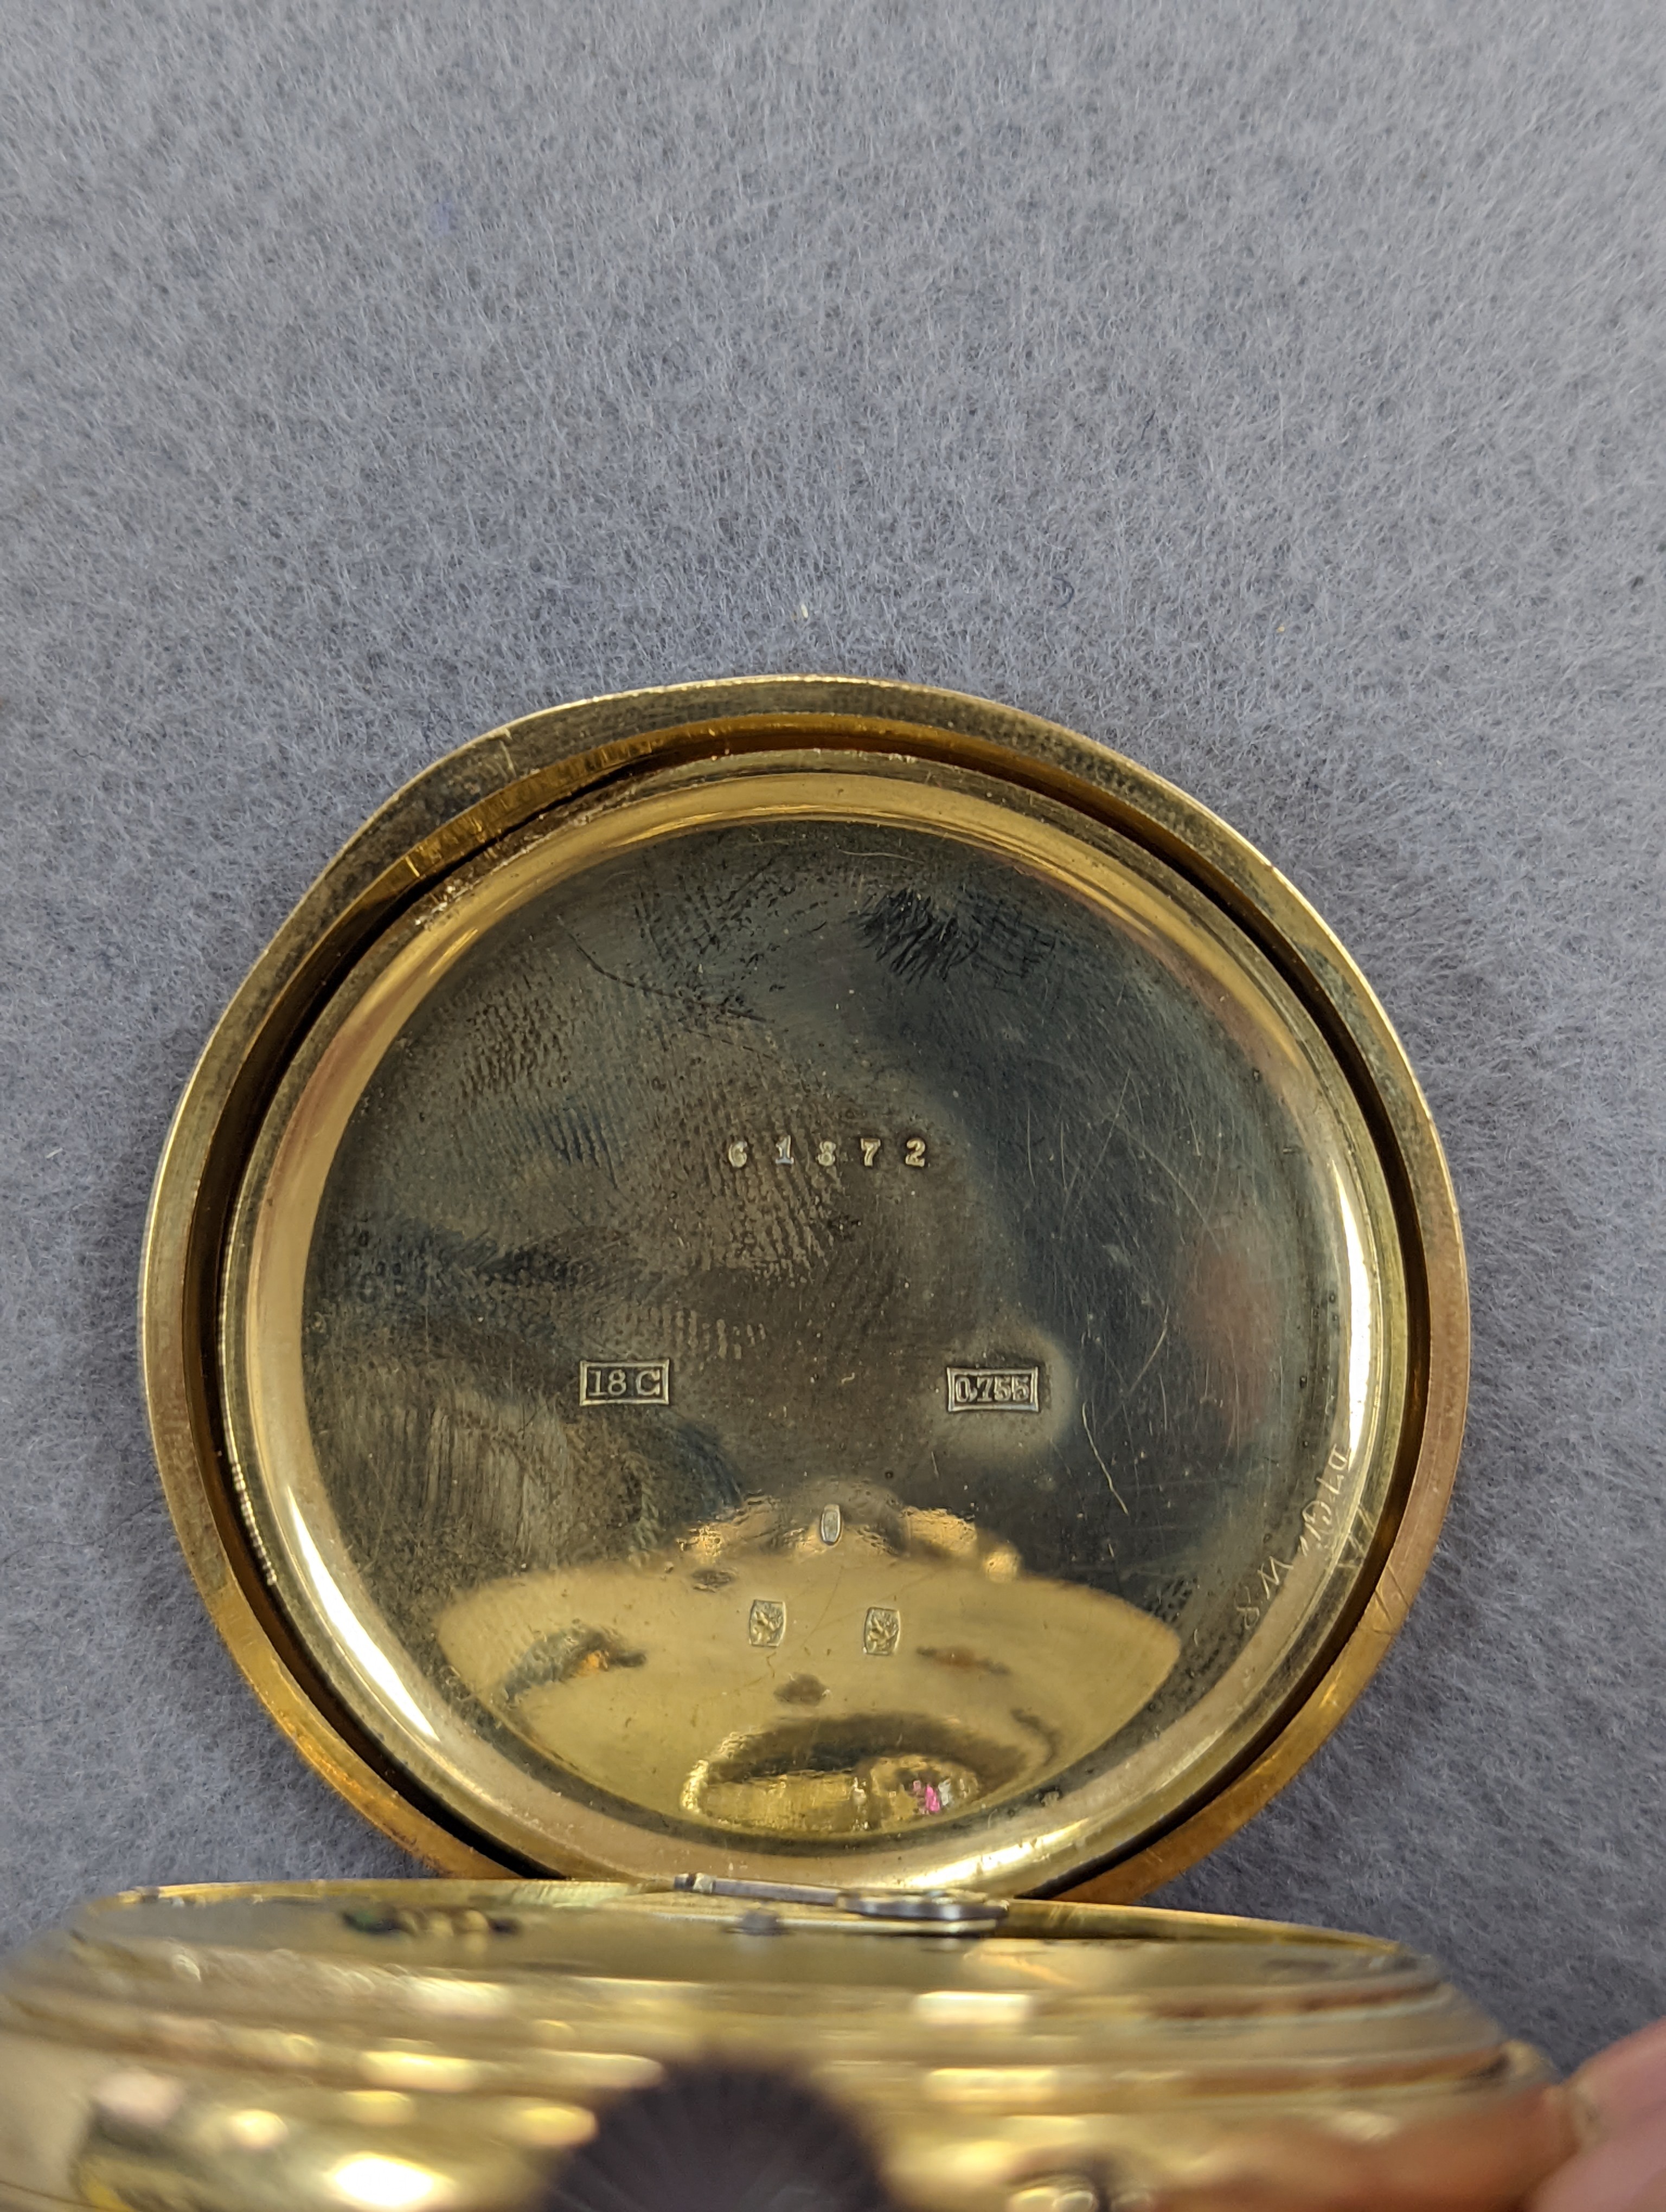 A Swiss 18k yellow metal keyless hunter pocket watch, with Roman dial and subsidiary seconds, case diameter 52mm, gross 121.8 grams, in fitted case.